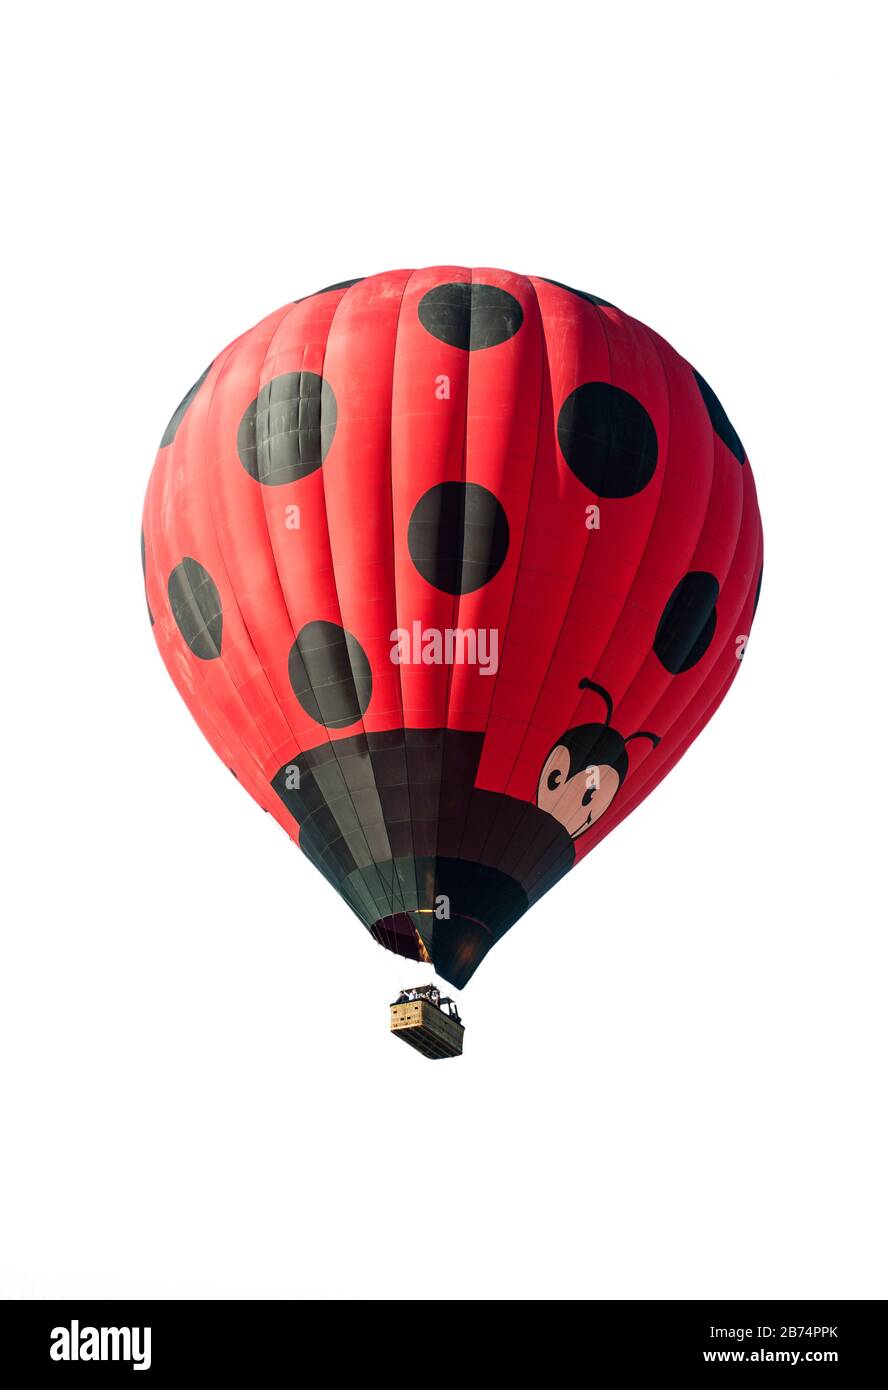 Balloonists / Aeronauts flying in hot-air balloon resembling a giant red ladybird against white background Stock Photo